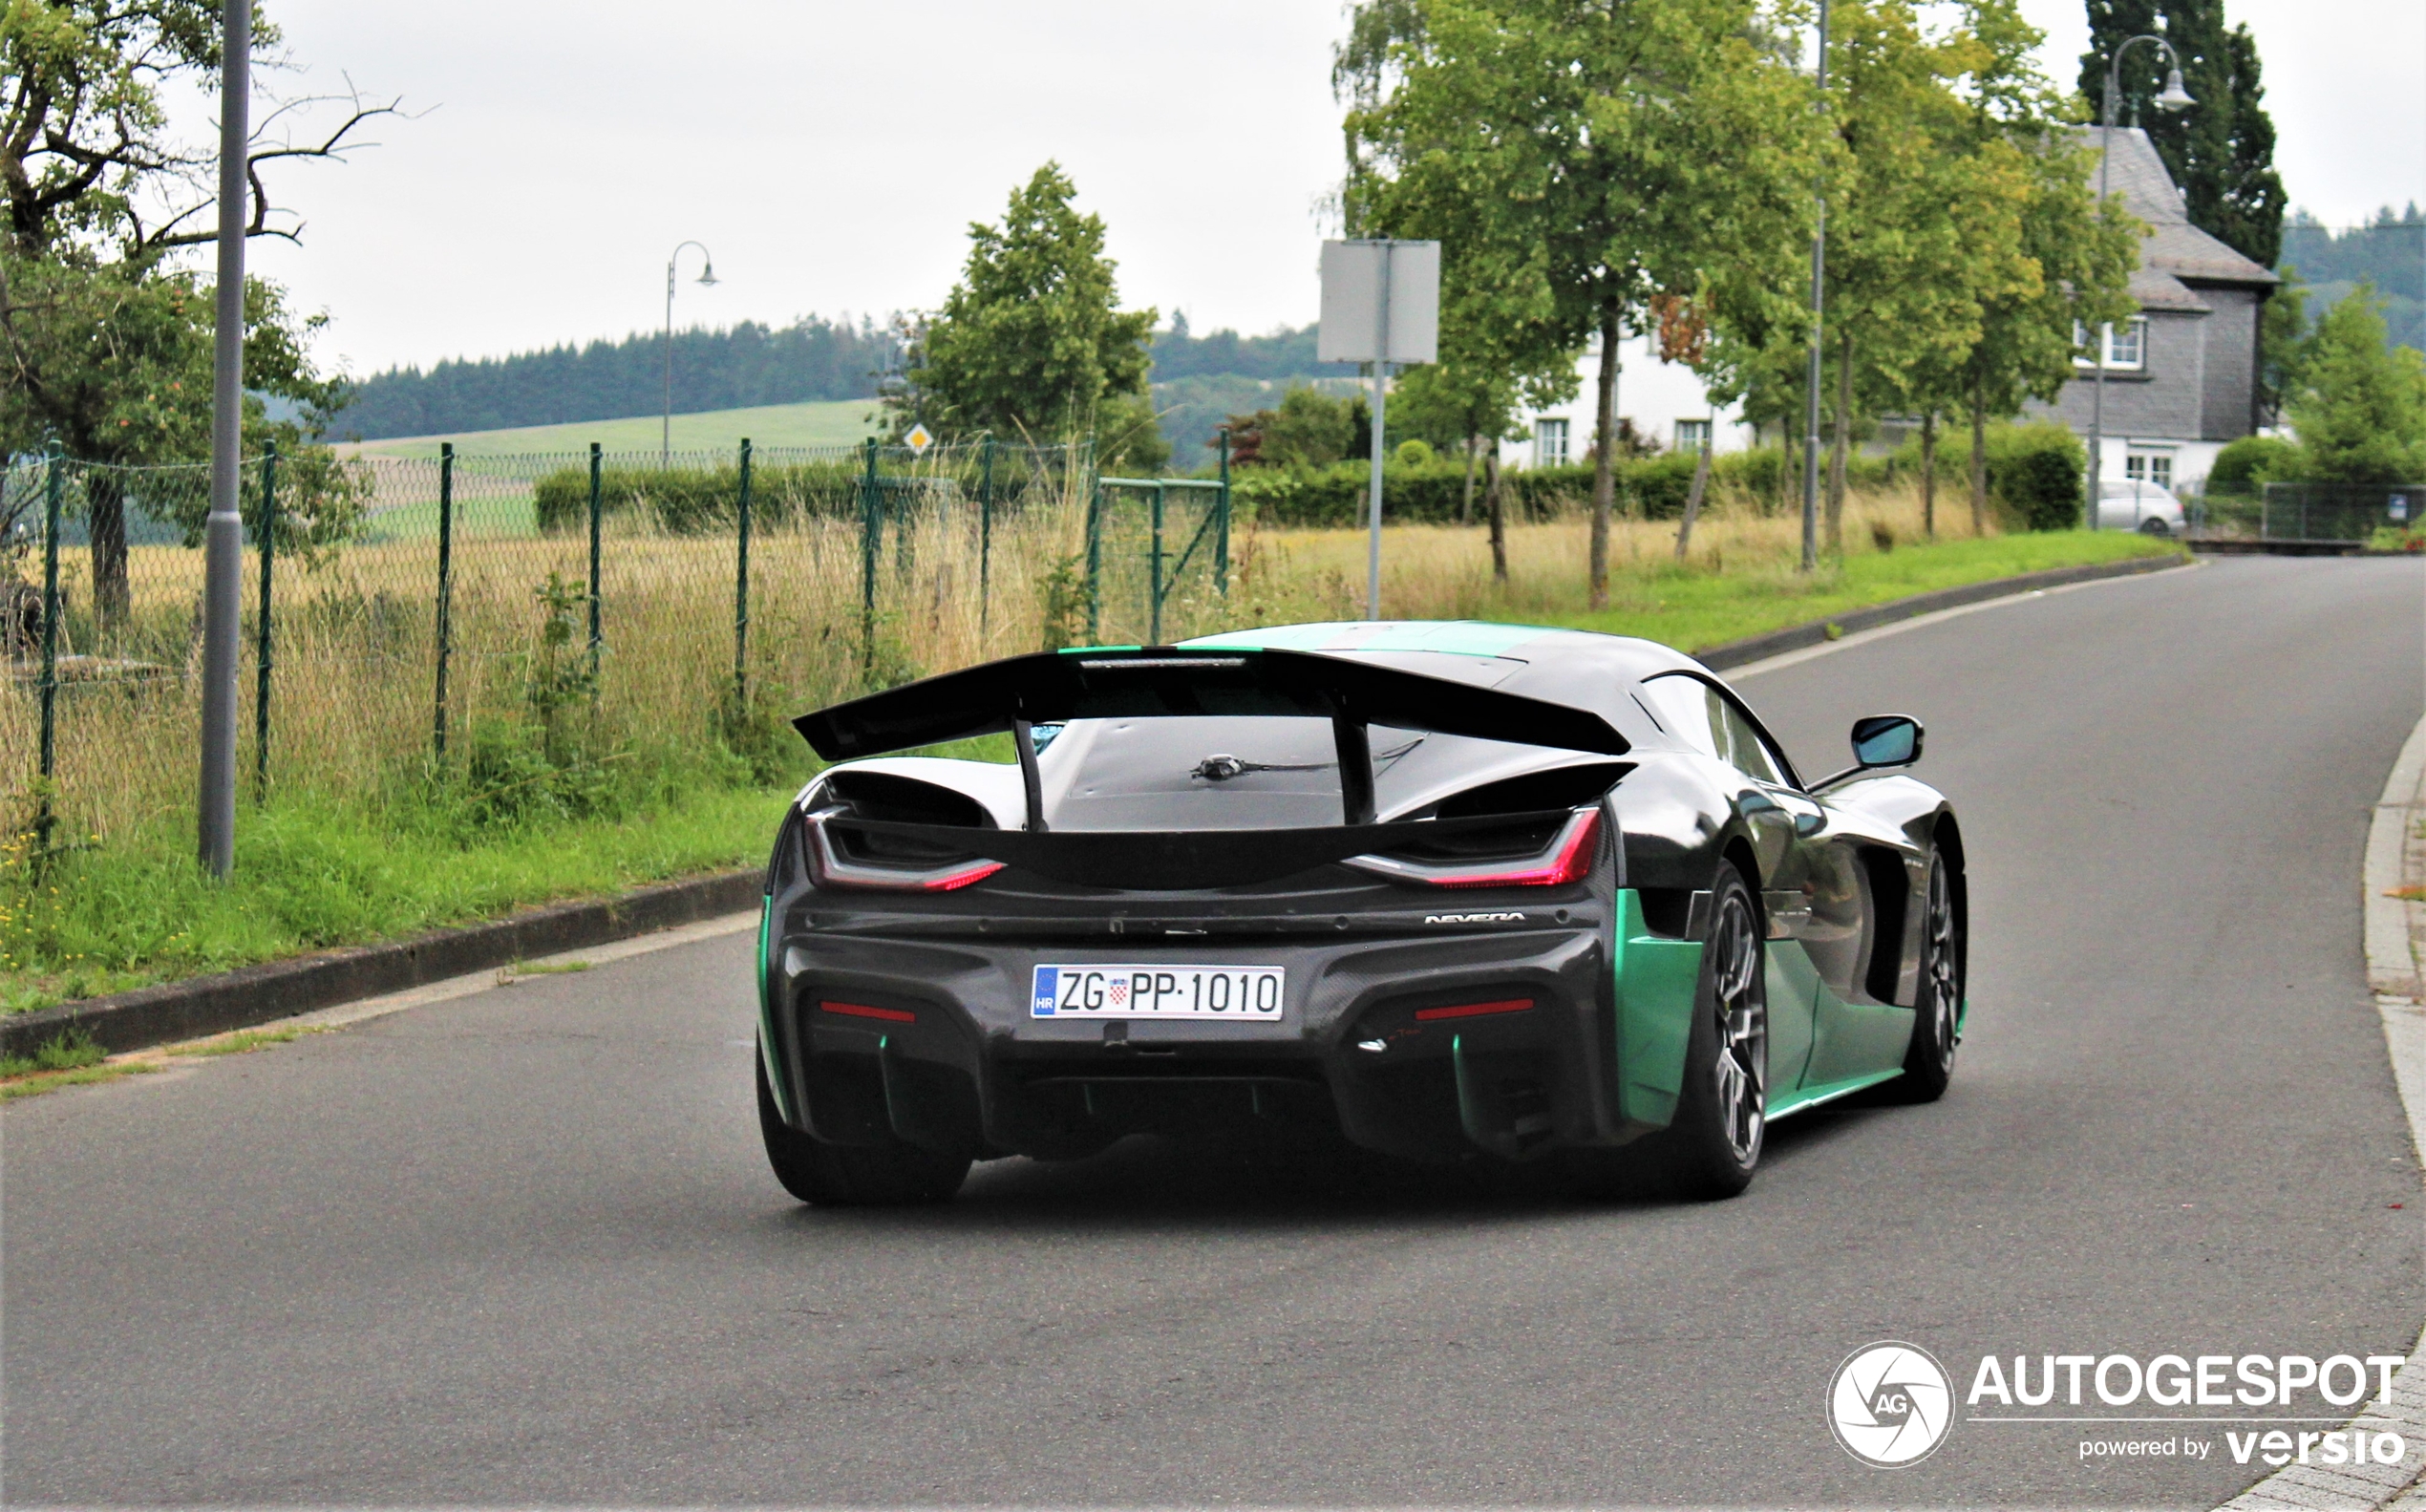 A Rimac Nevera shows up in the Eifel, Germany